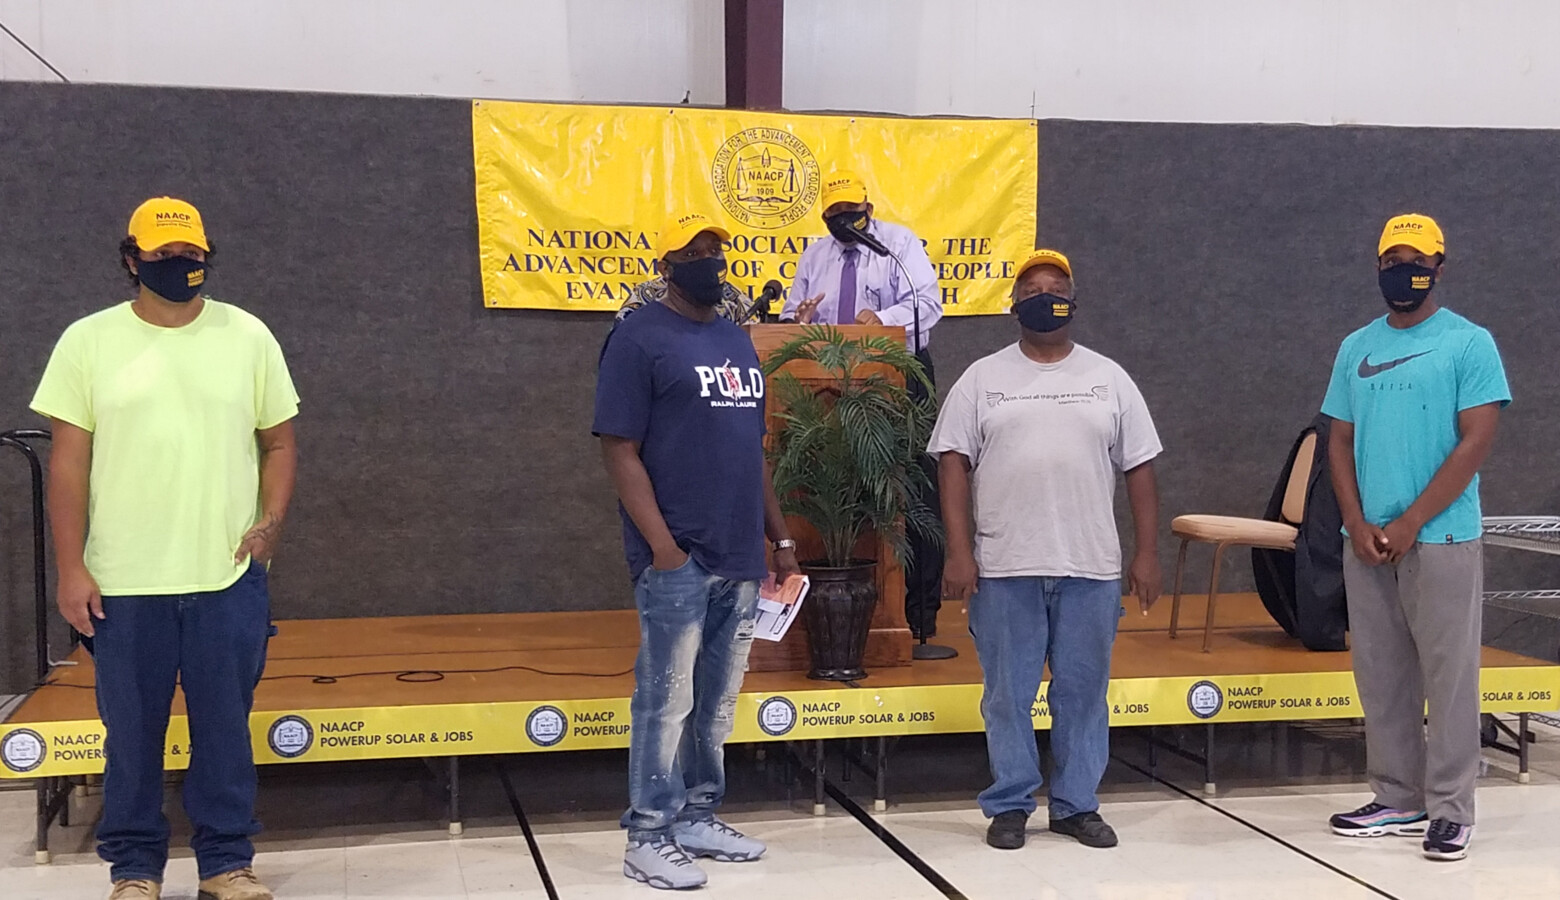 The Indiana NAACP announced the first group of graduates to finish its solar job training program. (Steve Burger/WNIN)